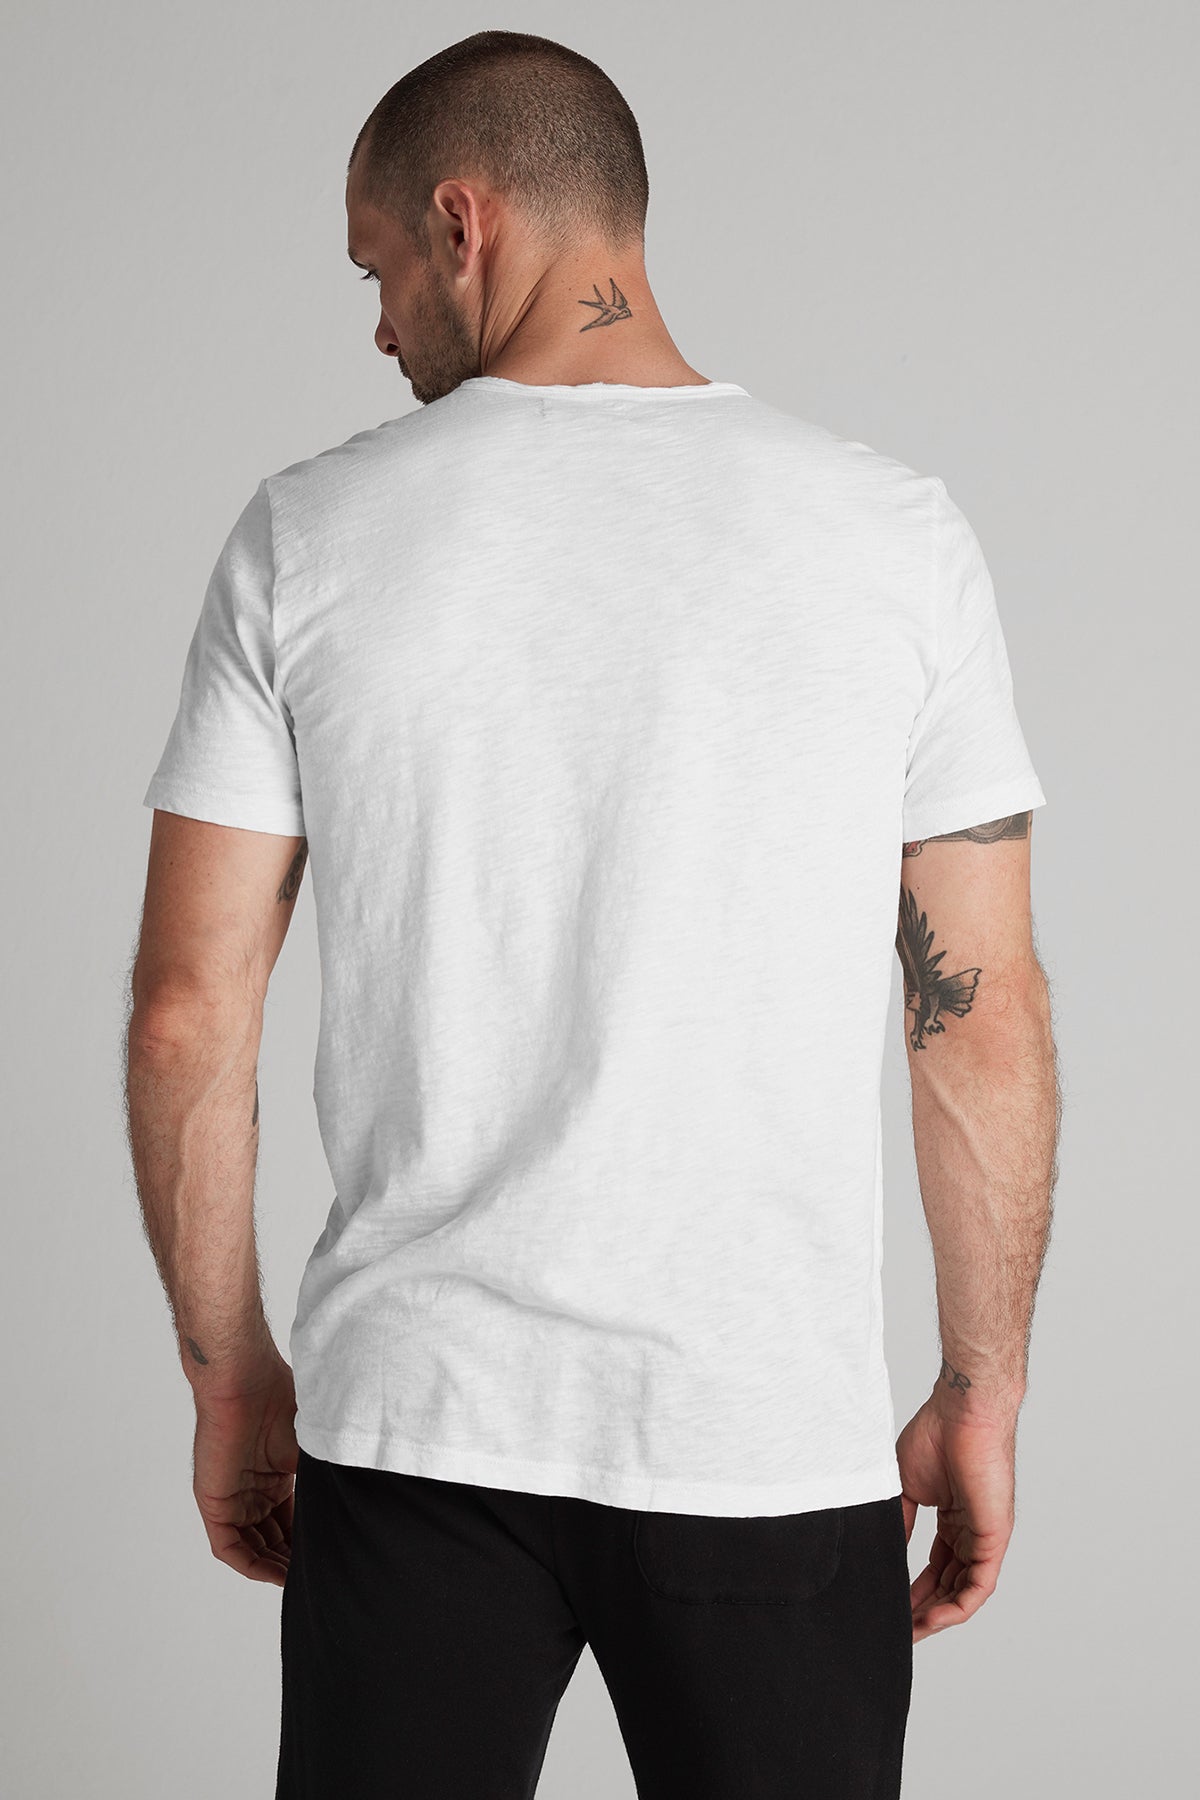 Man in a Velvet by Graham & Spencer CHAD TEE white t-shirt and black pants, viewed from behind, showing tattoos on both upper arms.-25485730775233